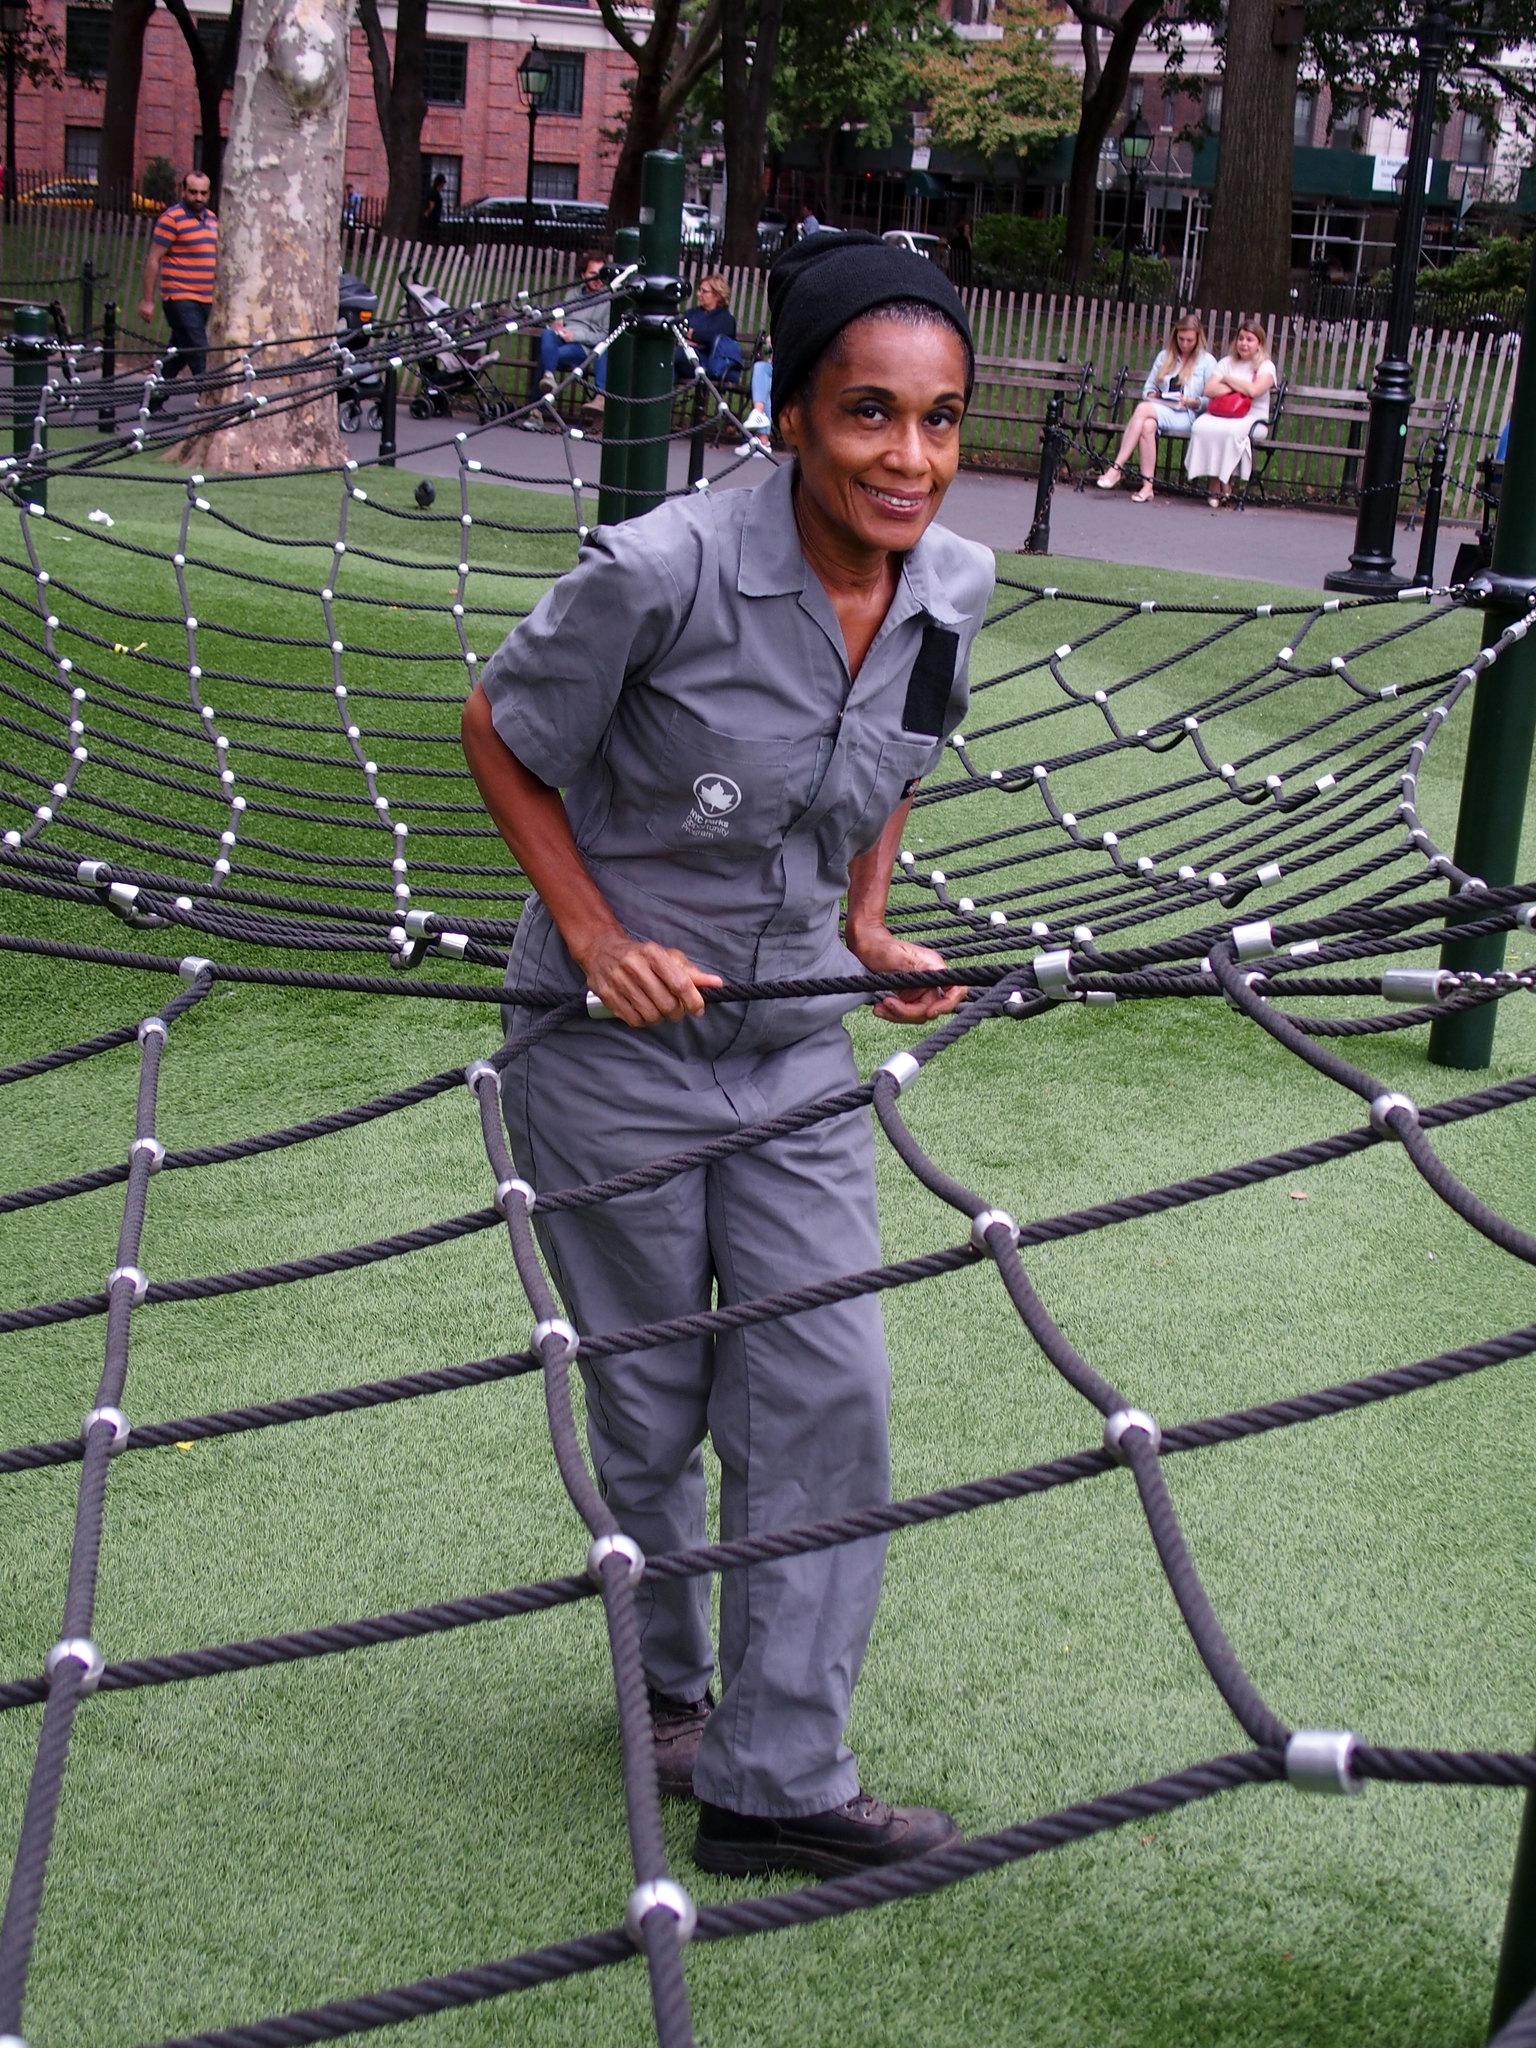 Youth Activities Coordinator, Miss Debbie stands in the middle of a climbing net in the small children's playground